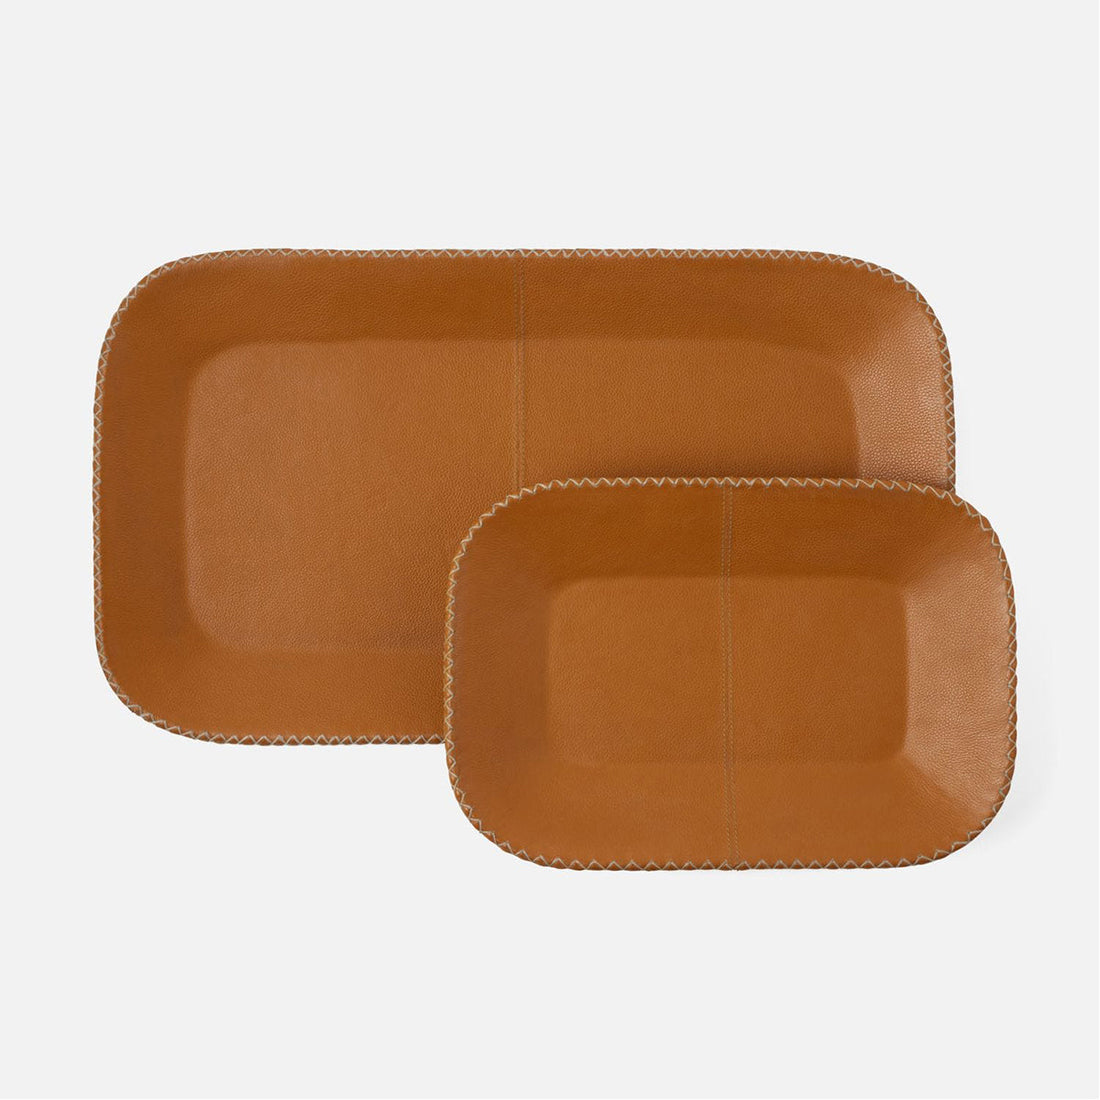 Made Goods Georgia Contrast Stitching Leather Tray, 2-Piece Set